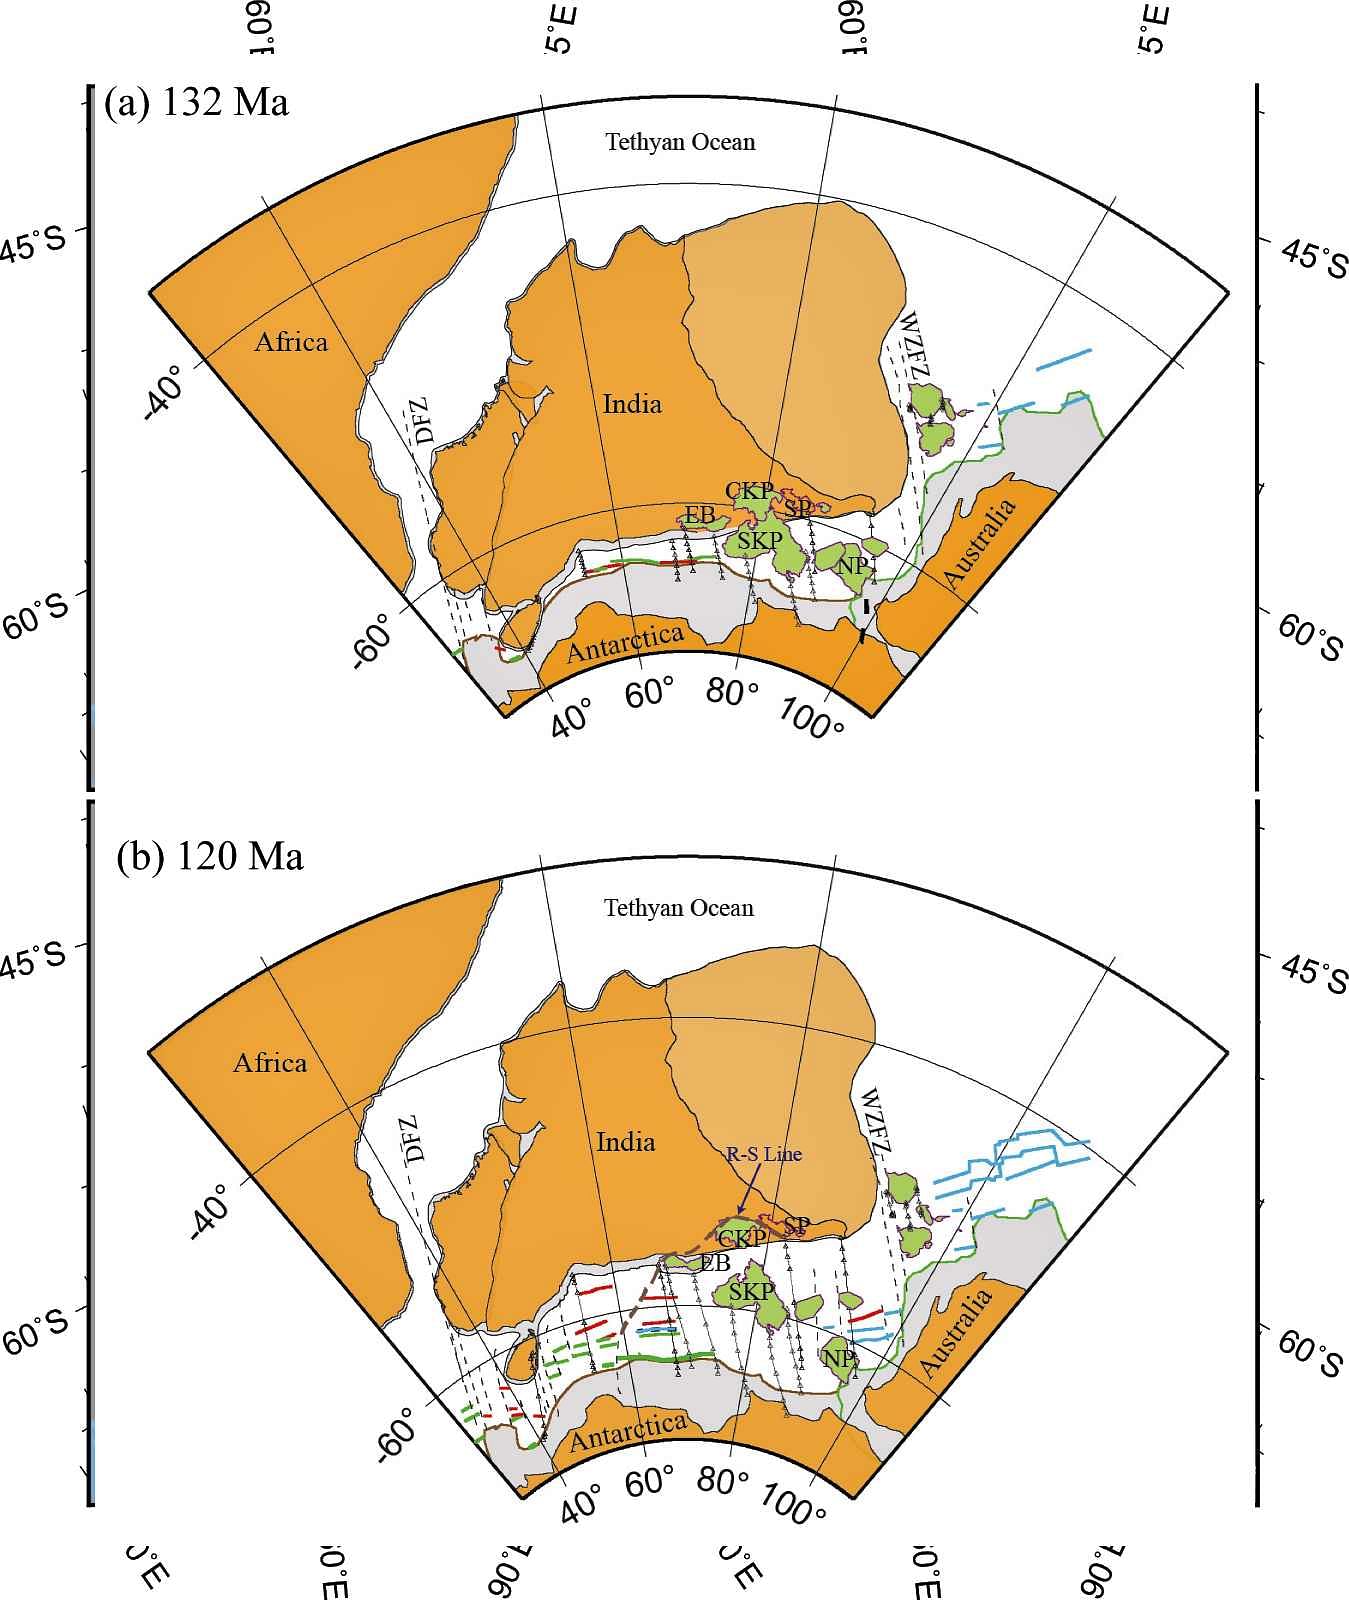 The positions of Greater India and East Antarctica at the ages of 132 Ma and 120 Ma (after Talwani et al., 2016). (a) Break-up in the first phase at 132 Ma depicting the initiation of seafloor spreading between India and Antarctica. Continental fragments shown with a light green colour (Southern Kerguelen Plateau, Central Kerguelen Plateau, Elan Bank and Naturalistic Plateau) continue to be with the Indian subcontinent even after the first breakup phase. (b) Breakup in the second phase at 120 Ma depicting the detachment of continental fragments shown with light green color from Greater India. Image shared by Prof. K.S. Krishna.